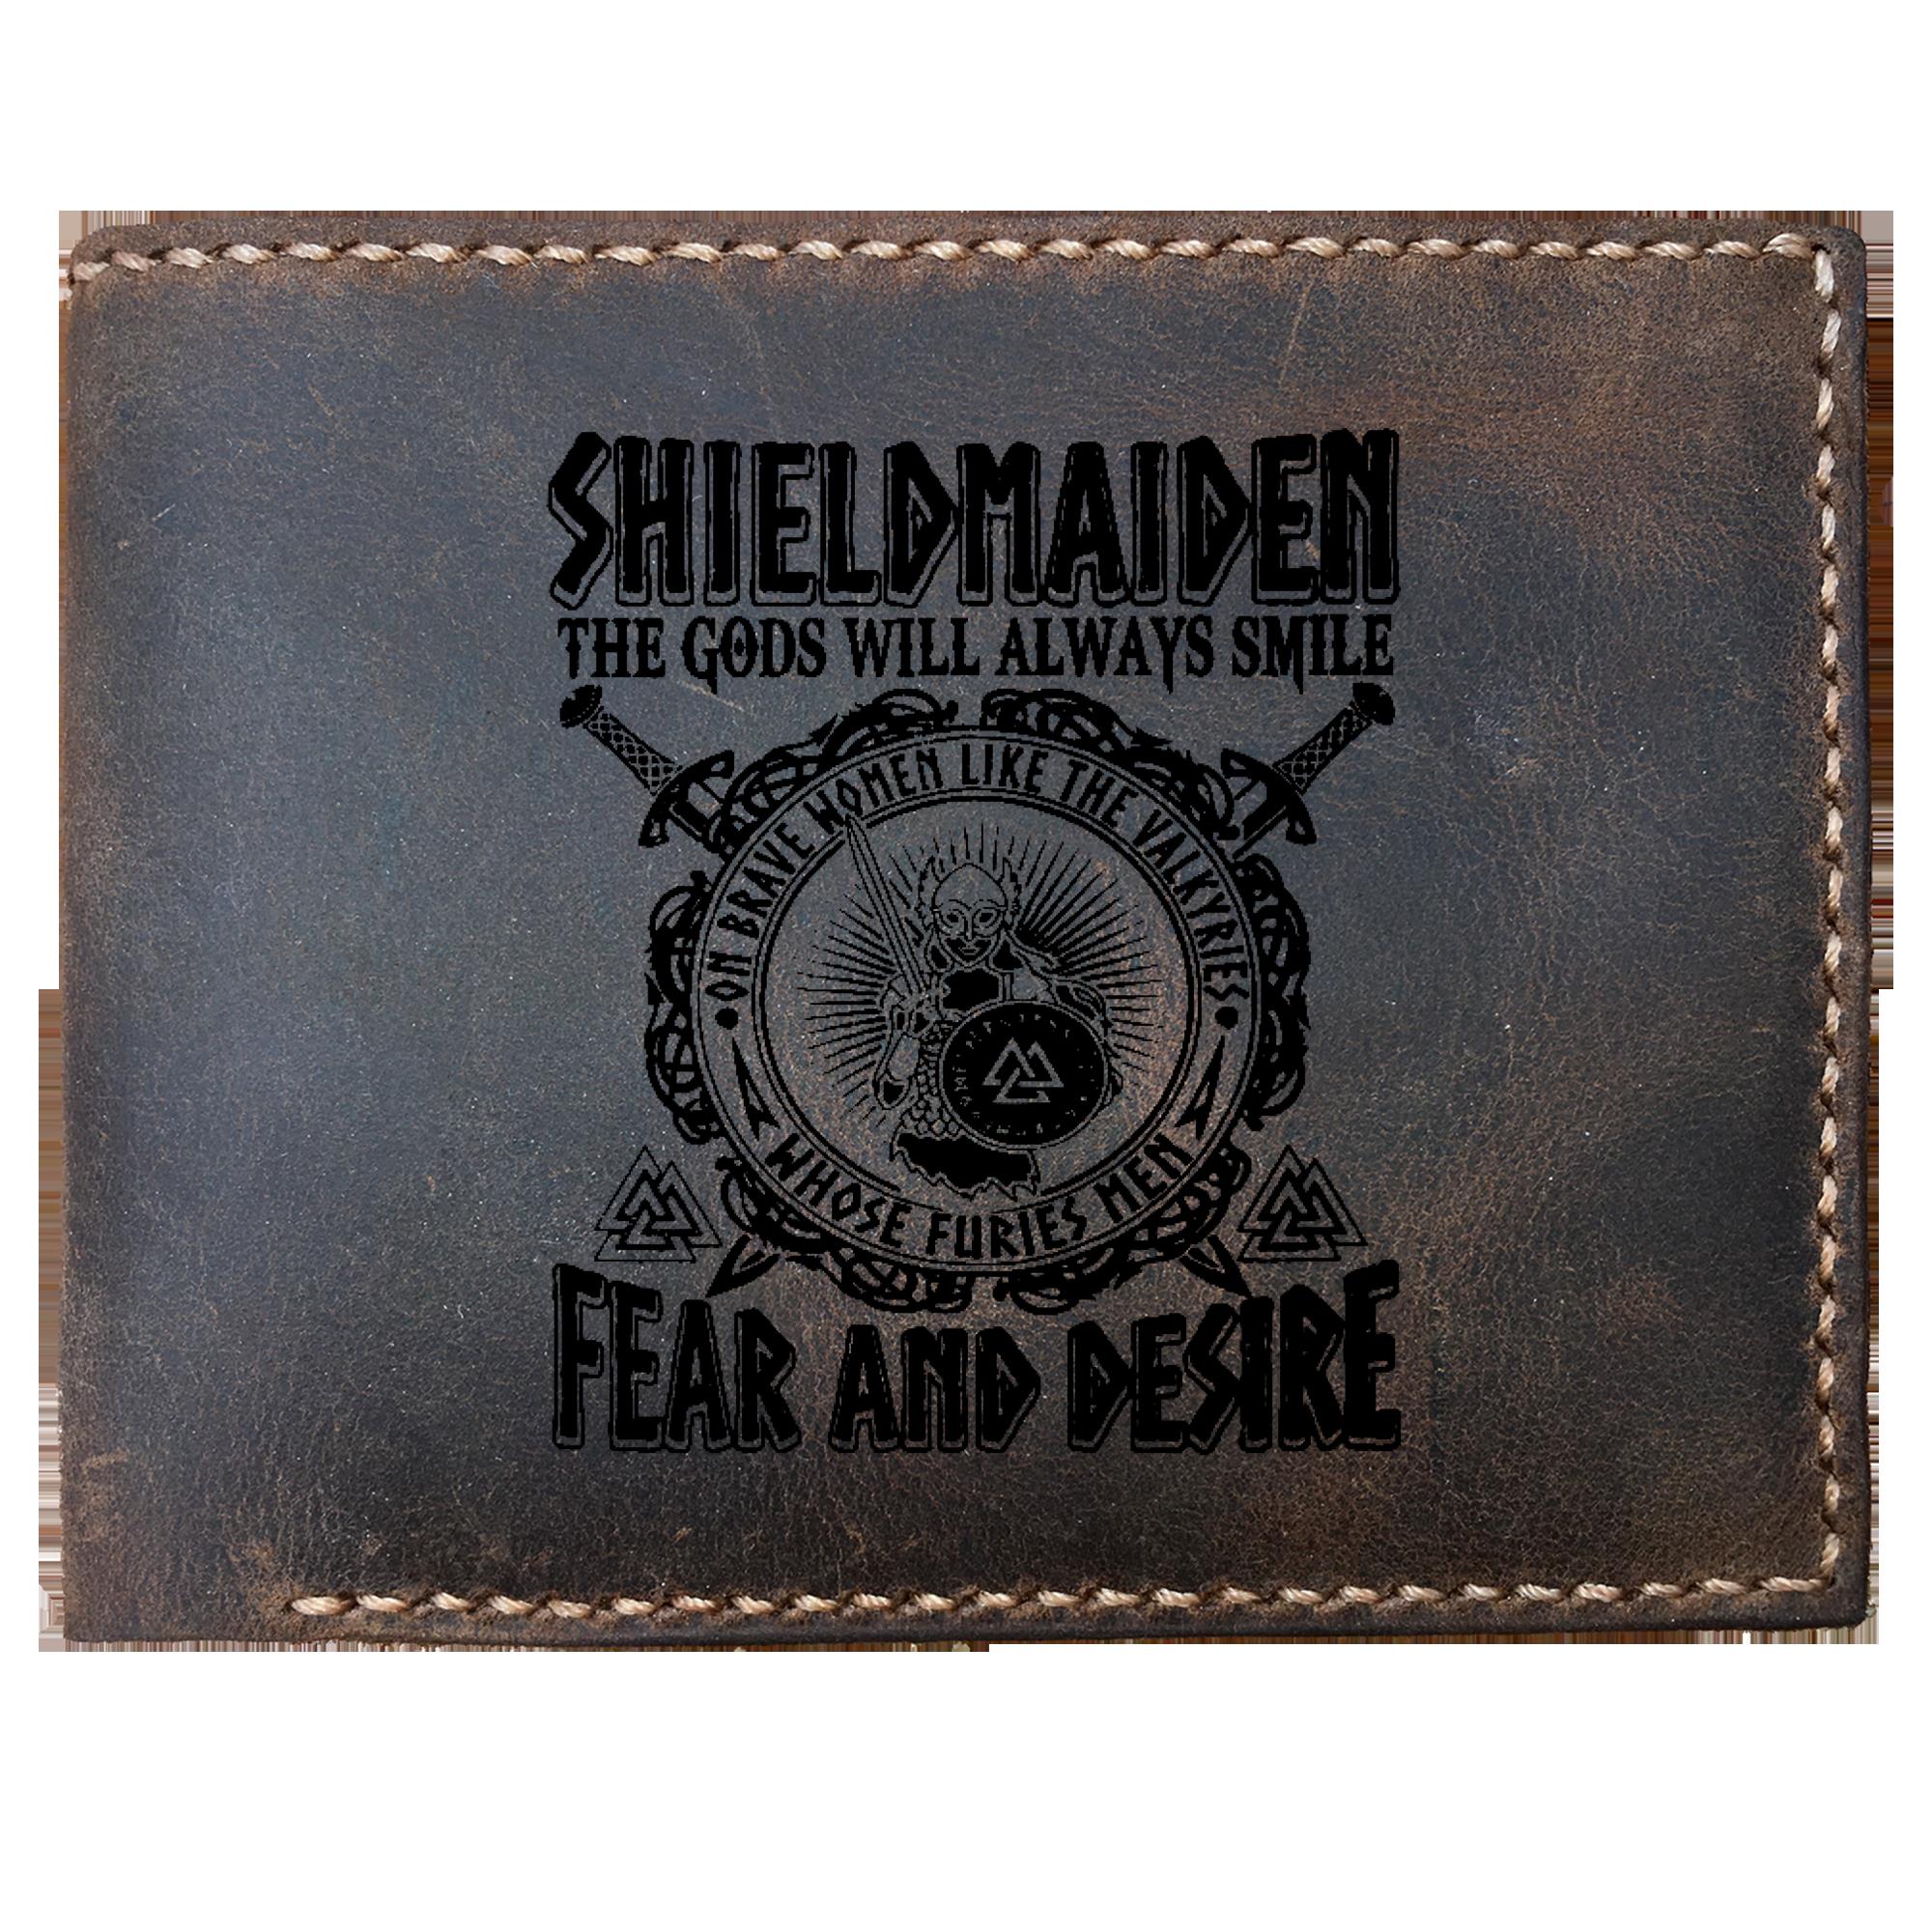 Skitongifts Funny Custom Laser Engraved Bifold Leather Wallet For Men, Shieldmaiden The Gods Will Alway Smile Warrior, Norse